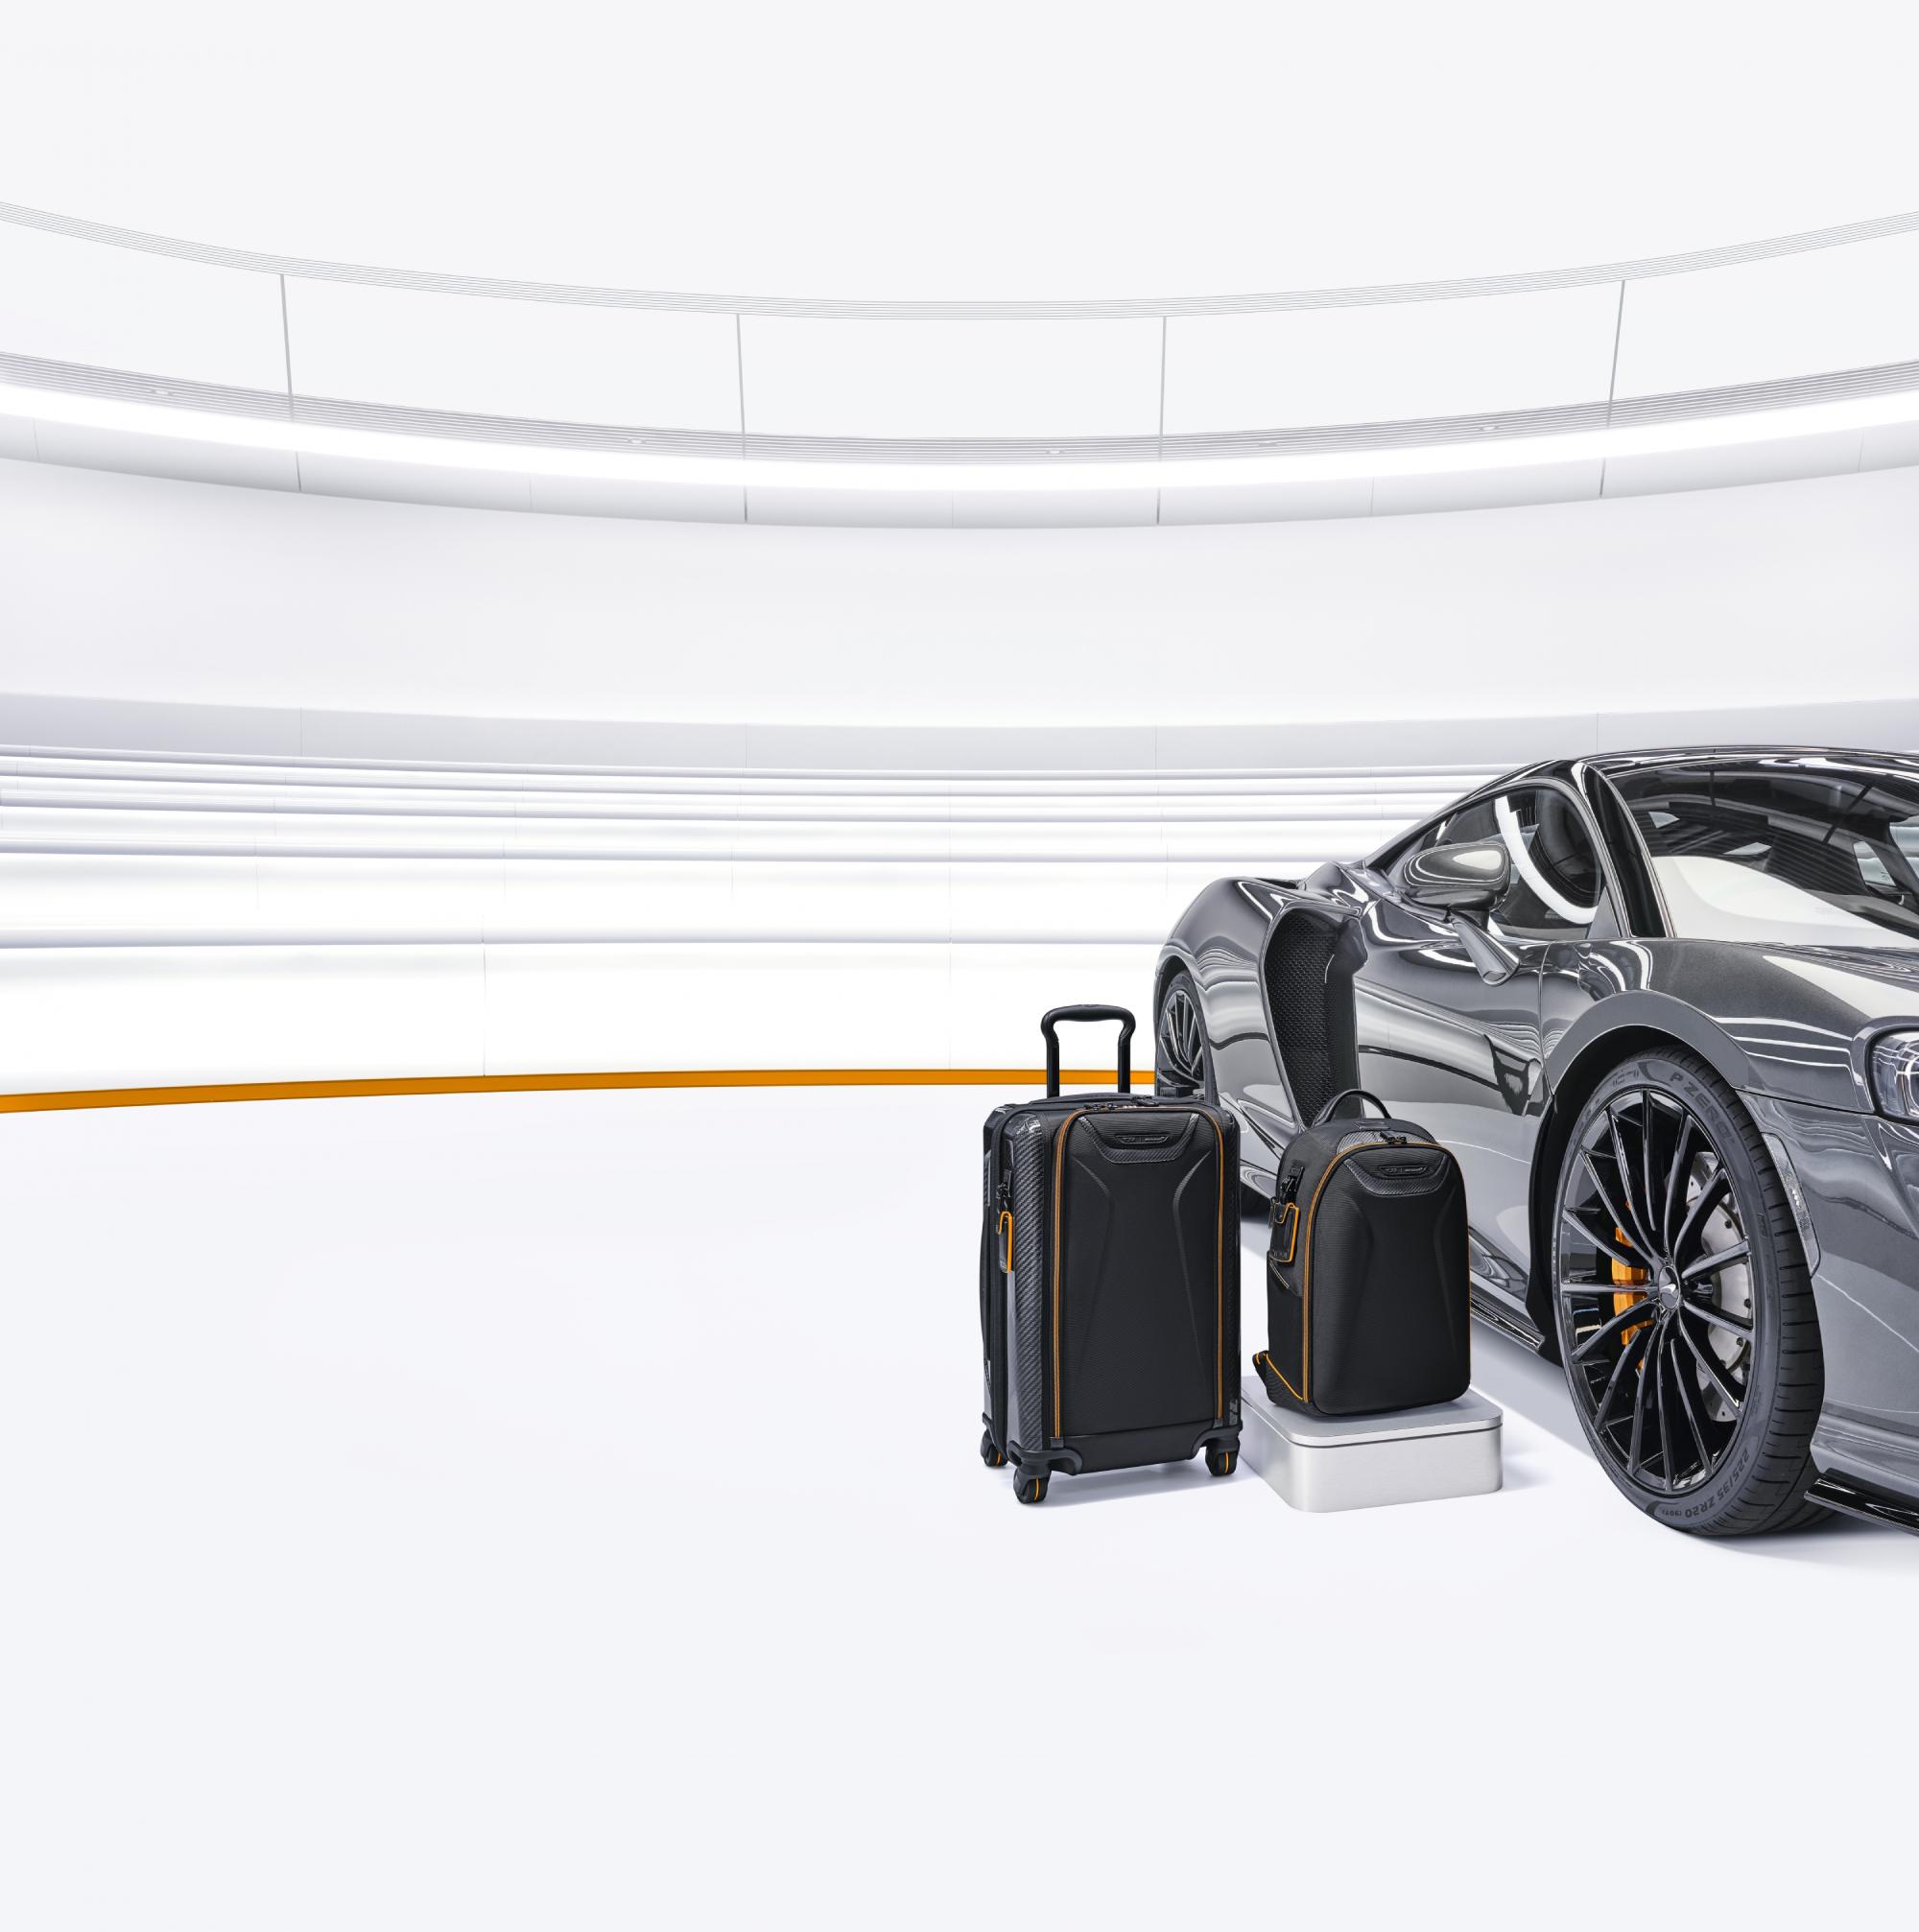 McLaren has endeavored beyond luxury cars into high-end luggage with their TUMI collaboration.